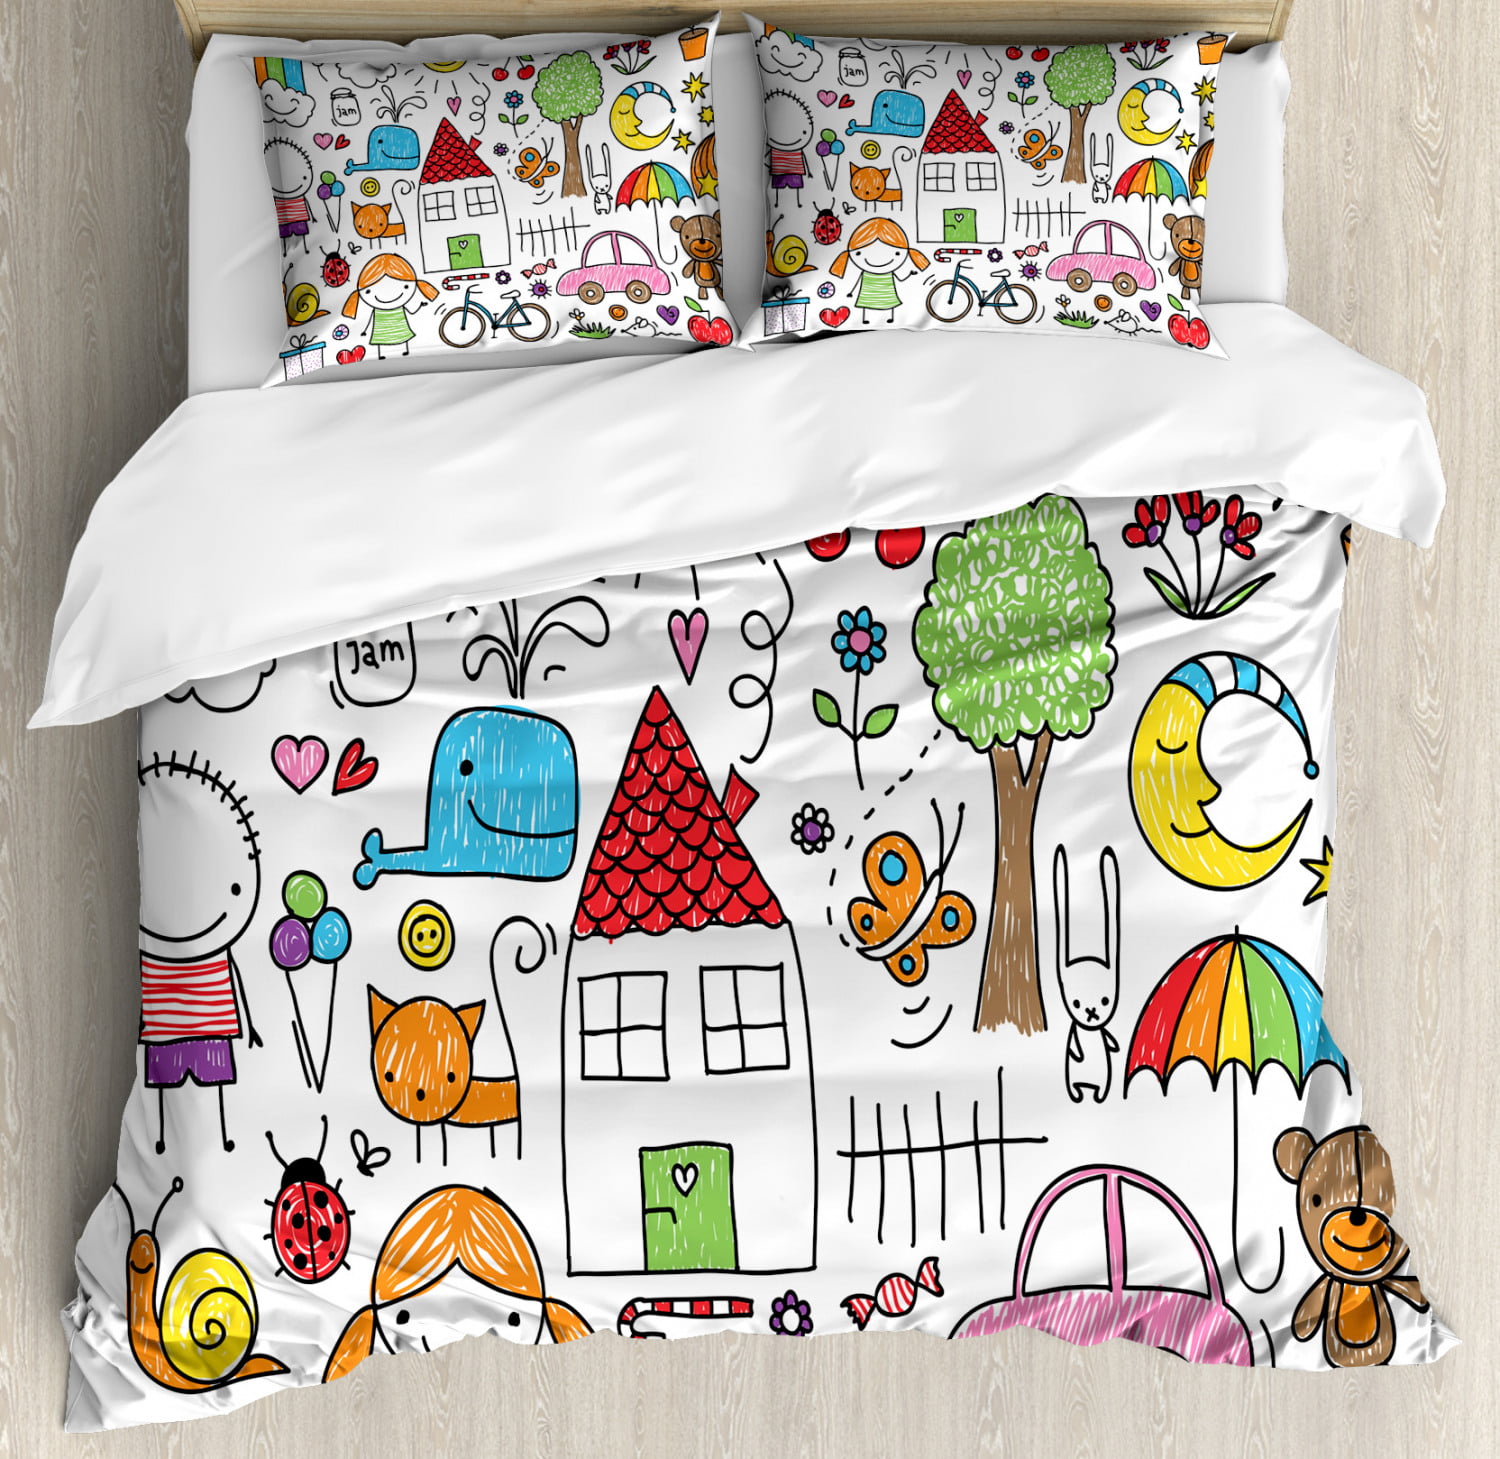 Queen London Kaye Whimsical Spring Bicycles Novelty Bedding Sheet Set